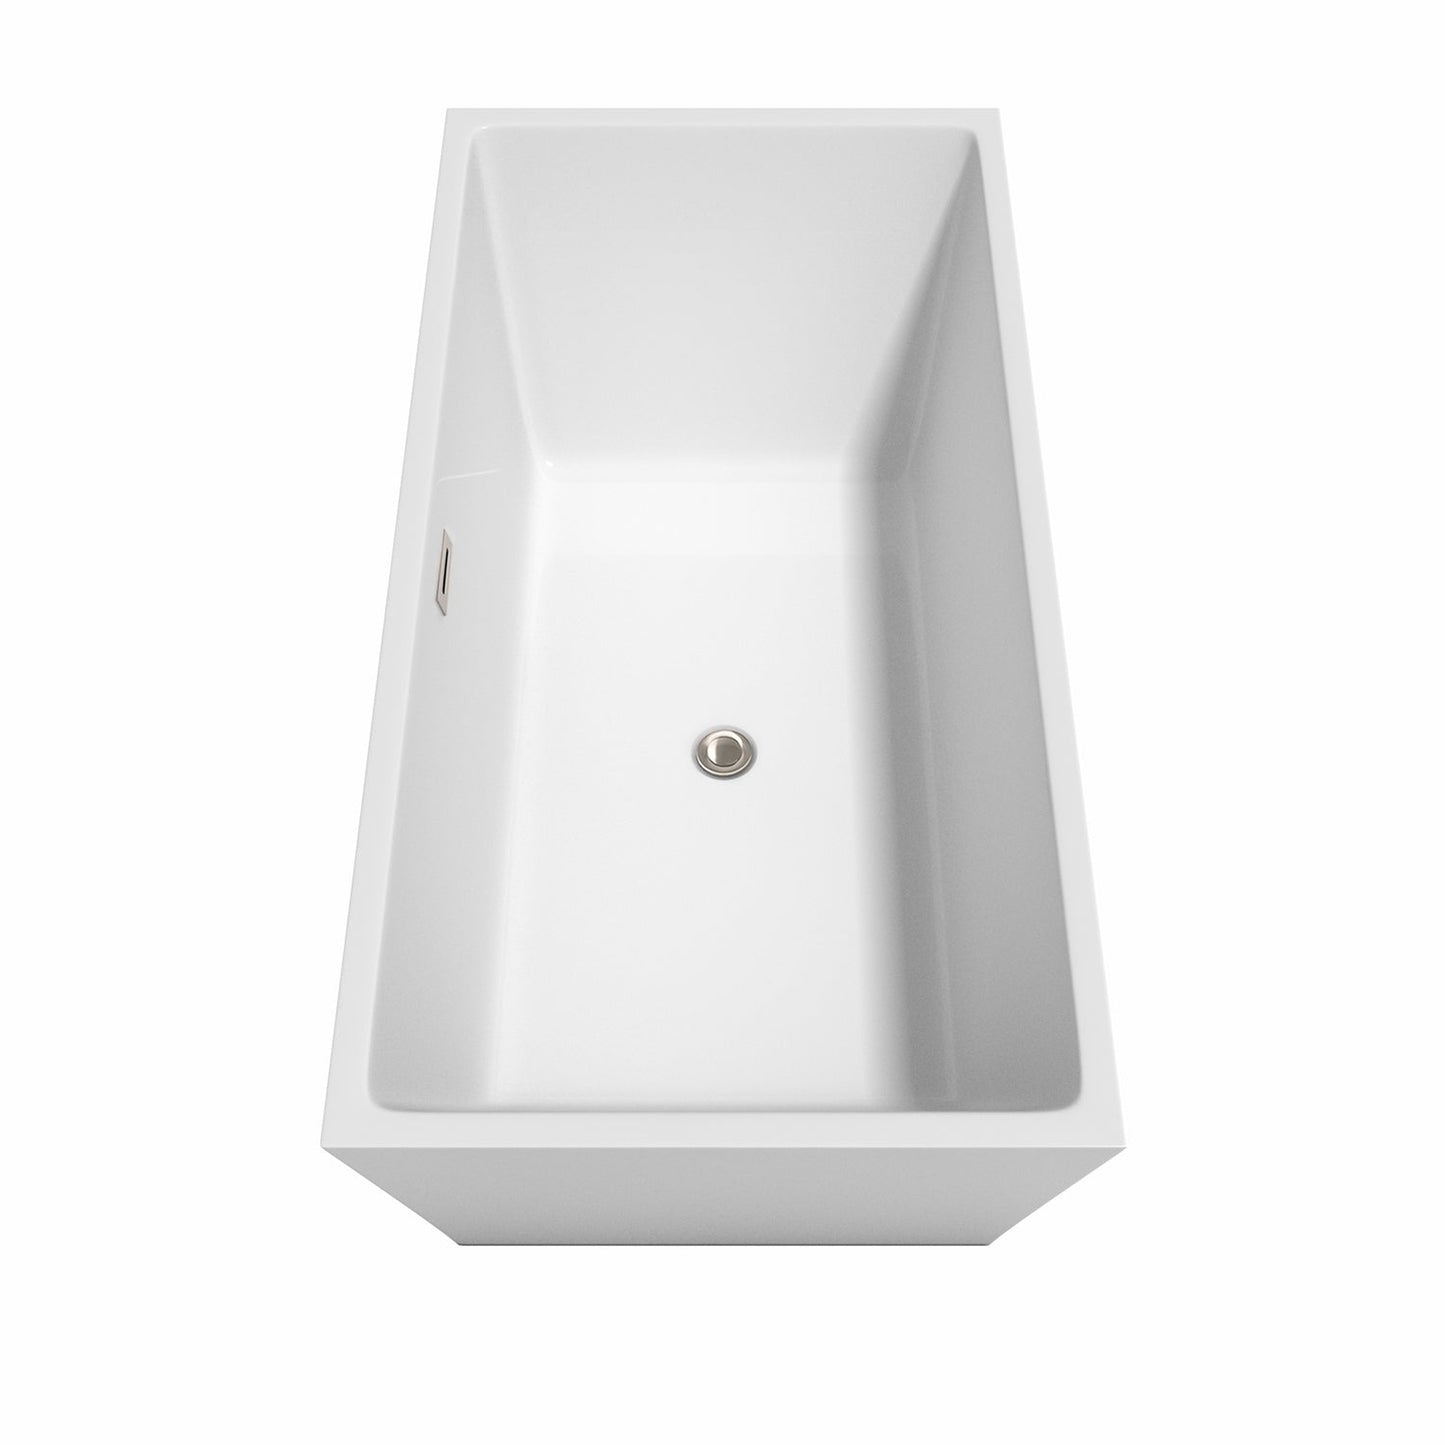 Wyndham Collection Sara 63" Freestanding Bathtub in White With Brushed Nickel Drain and Overflow Trim